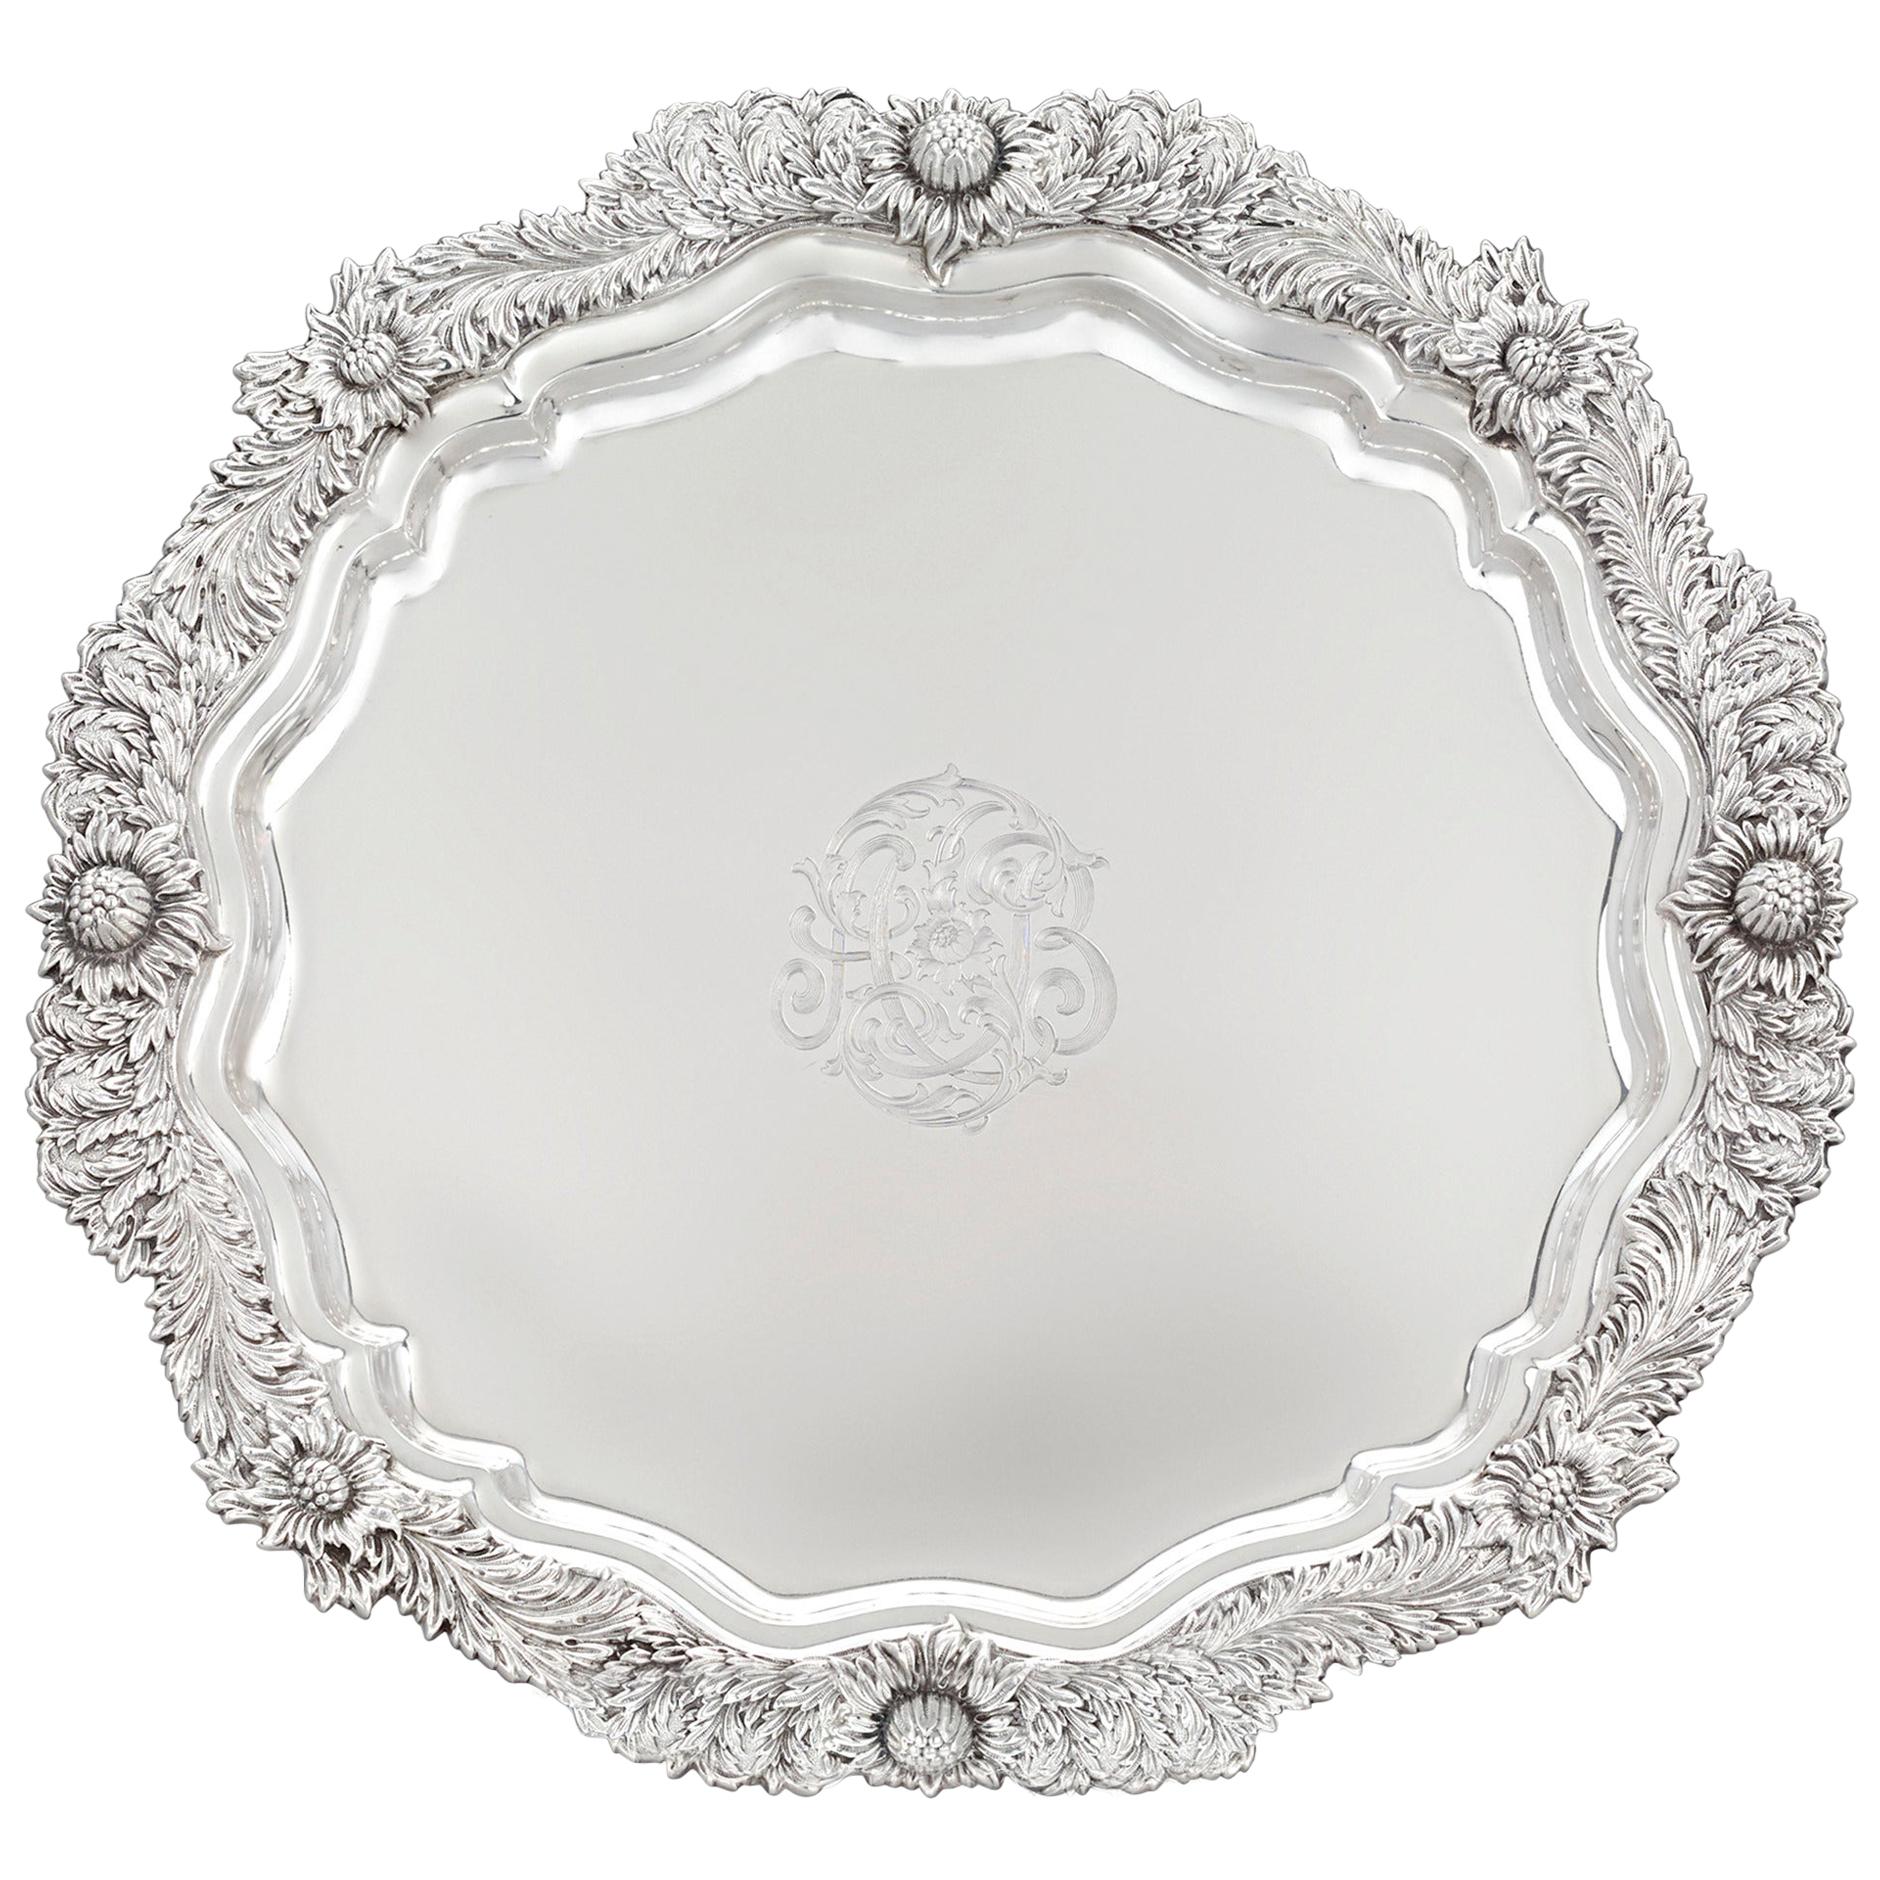 Chrysanthemum Sterling Silver Round Tray by Tiffany & Co.